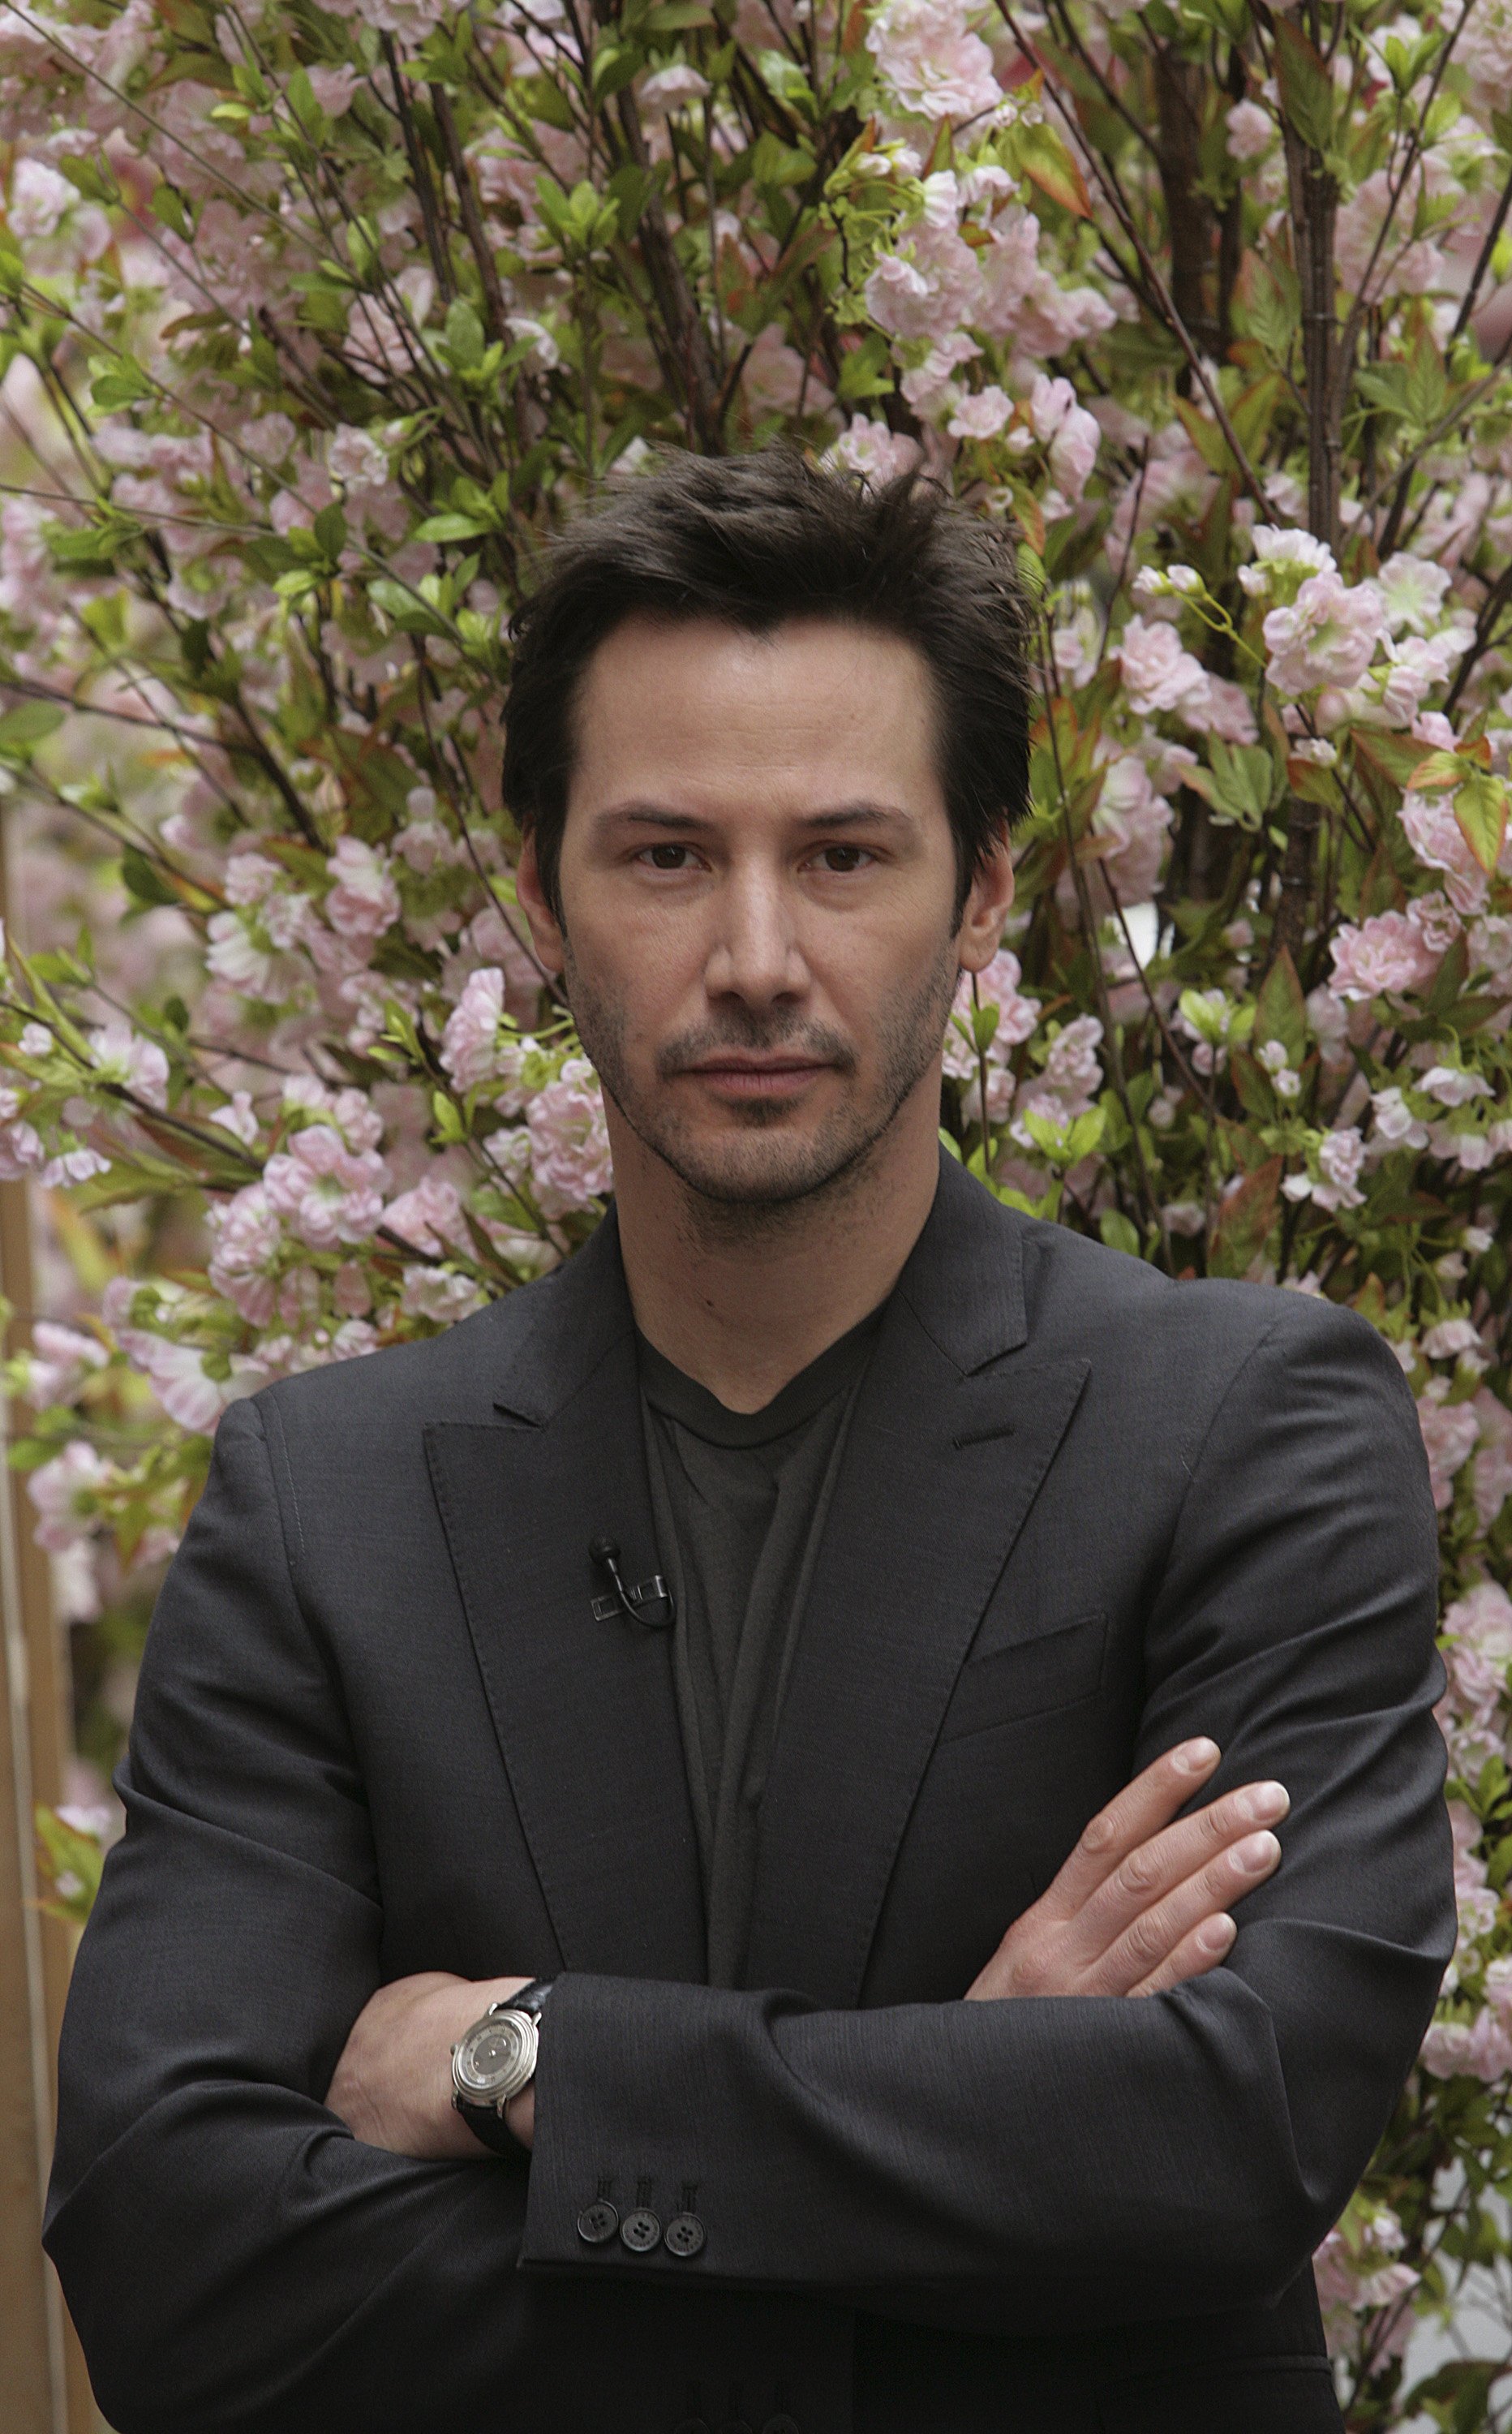 Keanu Reeves on the "Today" to talk about his new movie, "Street Kings" in an unspecified photo. | Source: Getty Images